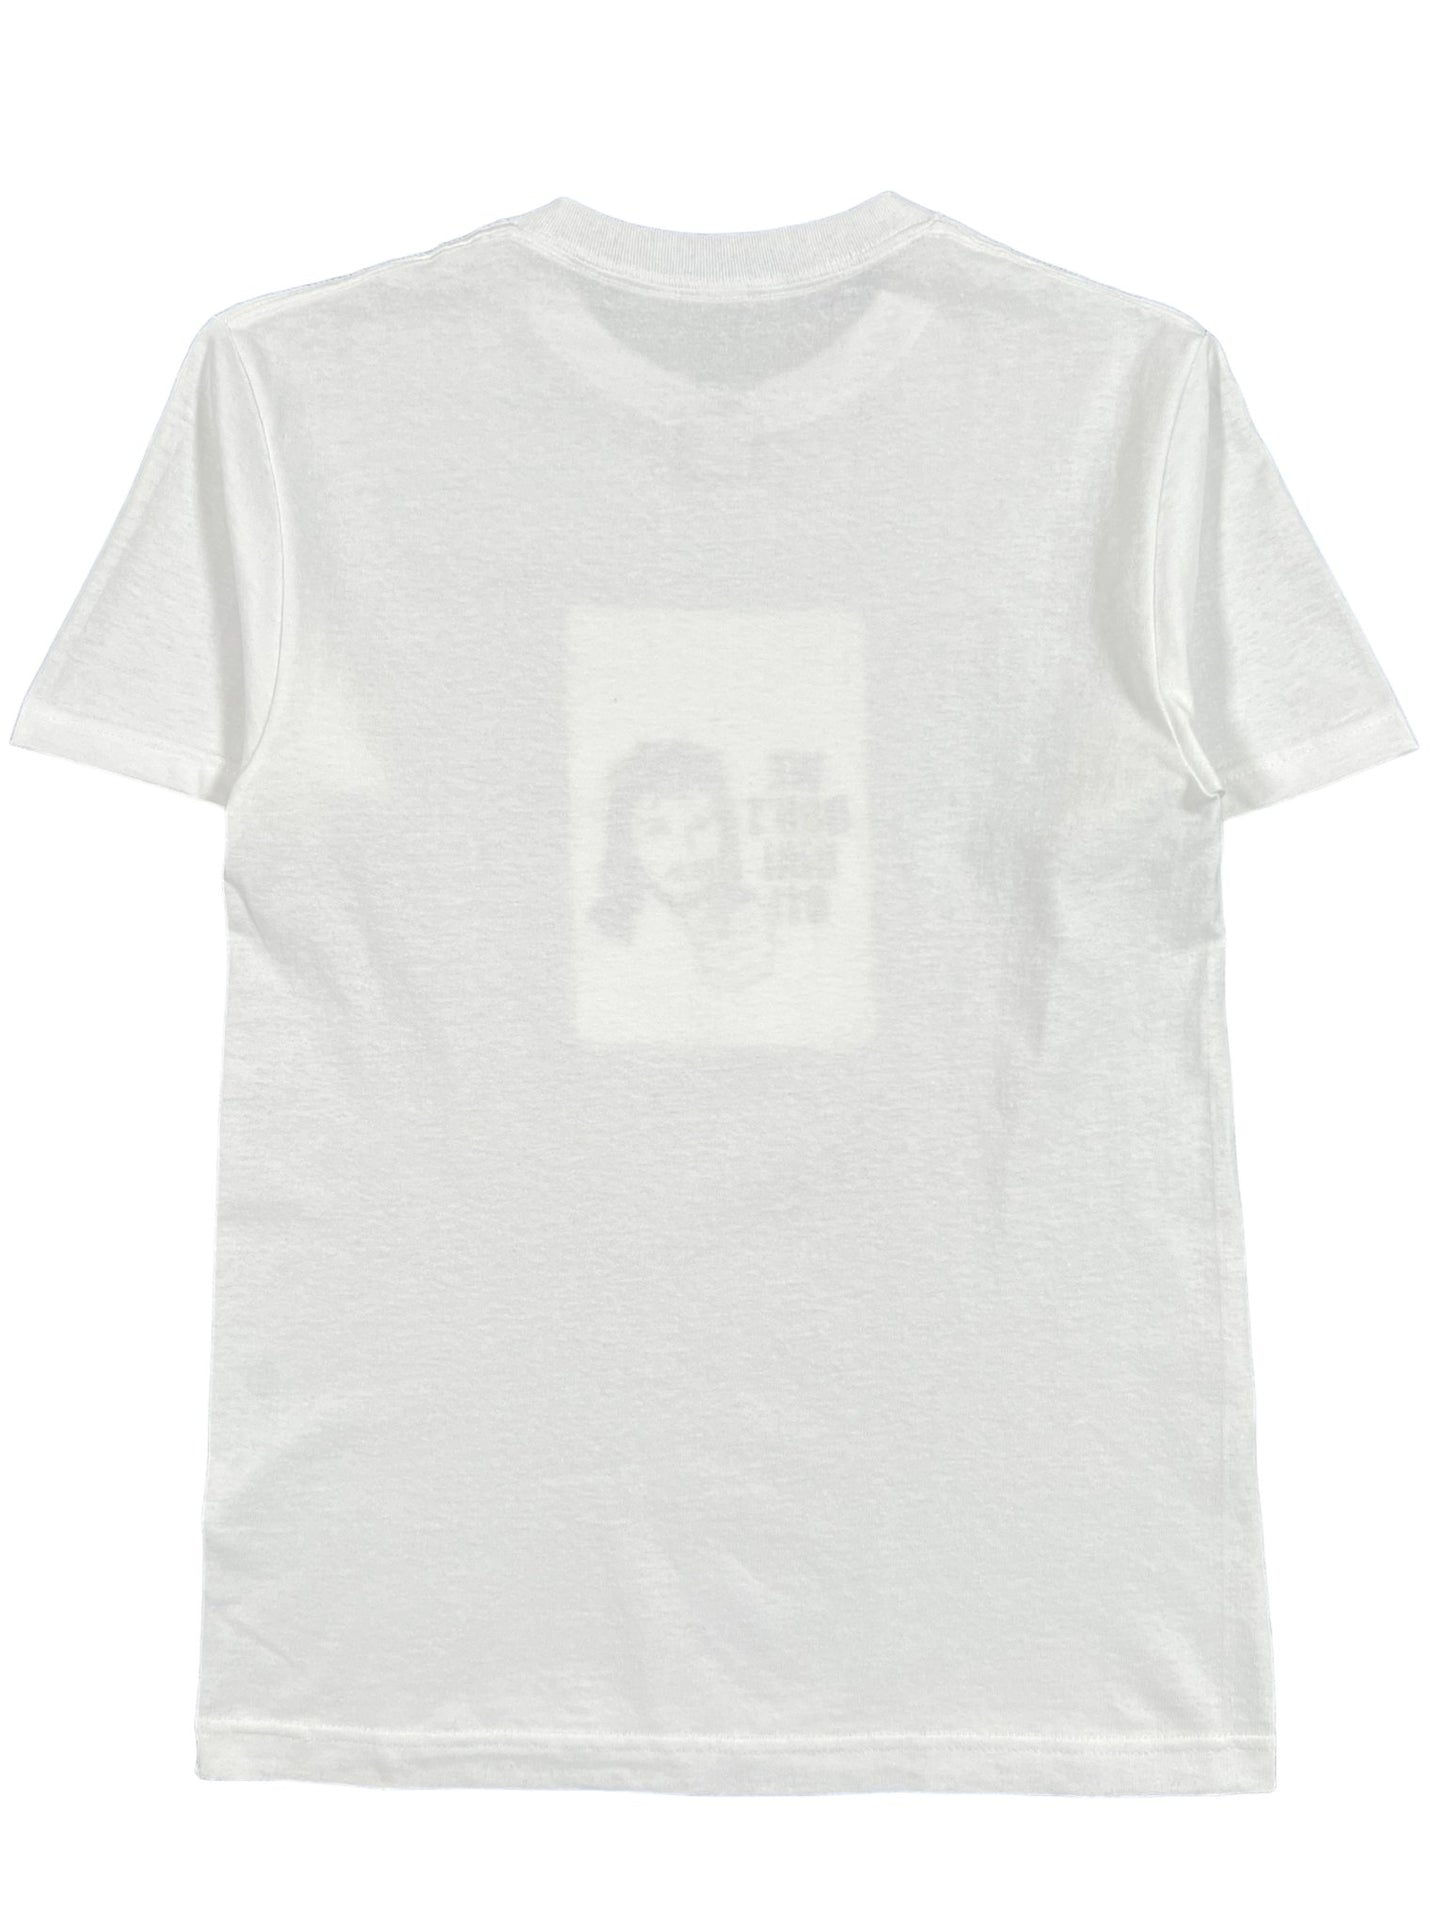 A white graphic t-shirt with a picture of a woman on it featuring PLEASURES branding, such as the PLEASURES TRESPASS T-SHIRT WHT.